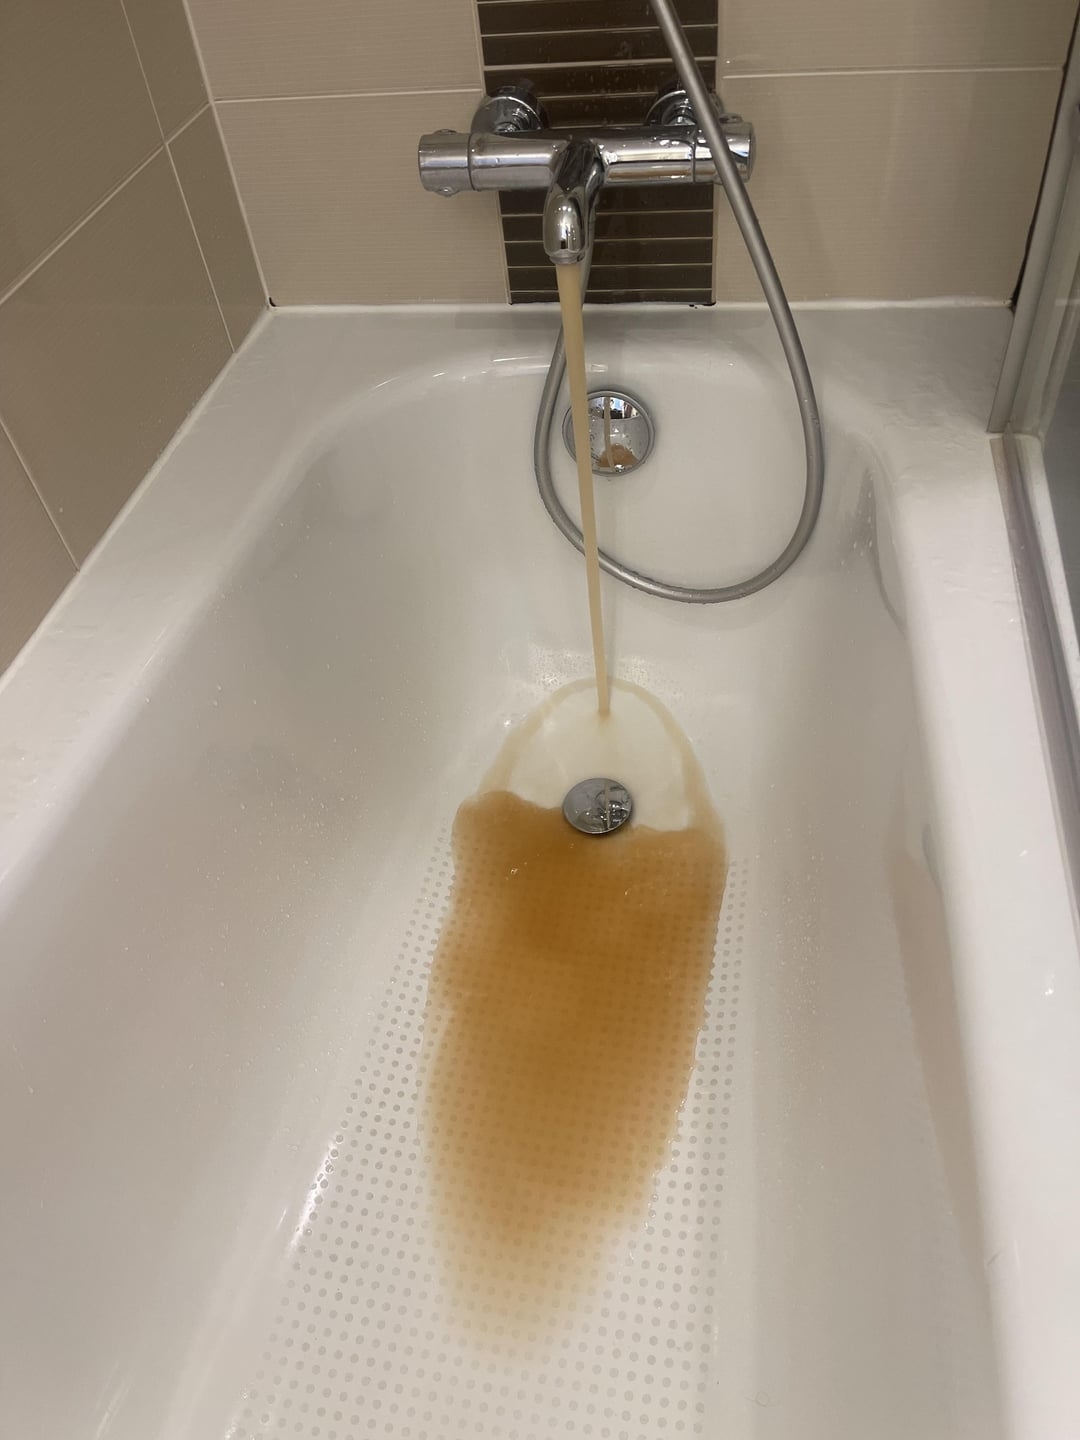 A bathtub with brownish water flowing from the tap, possibly indicating rusty pipes